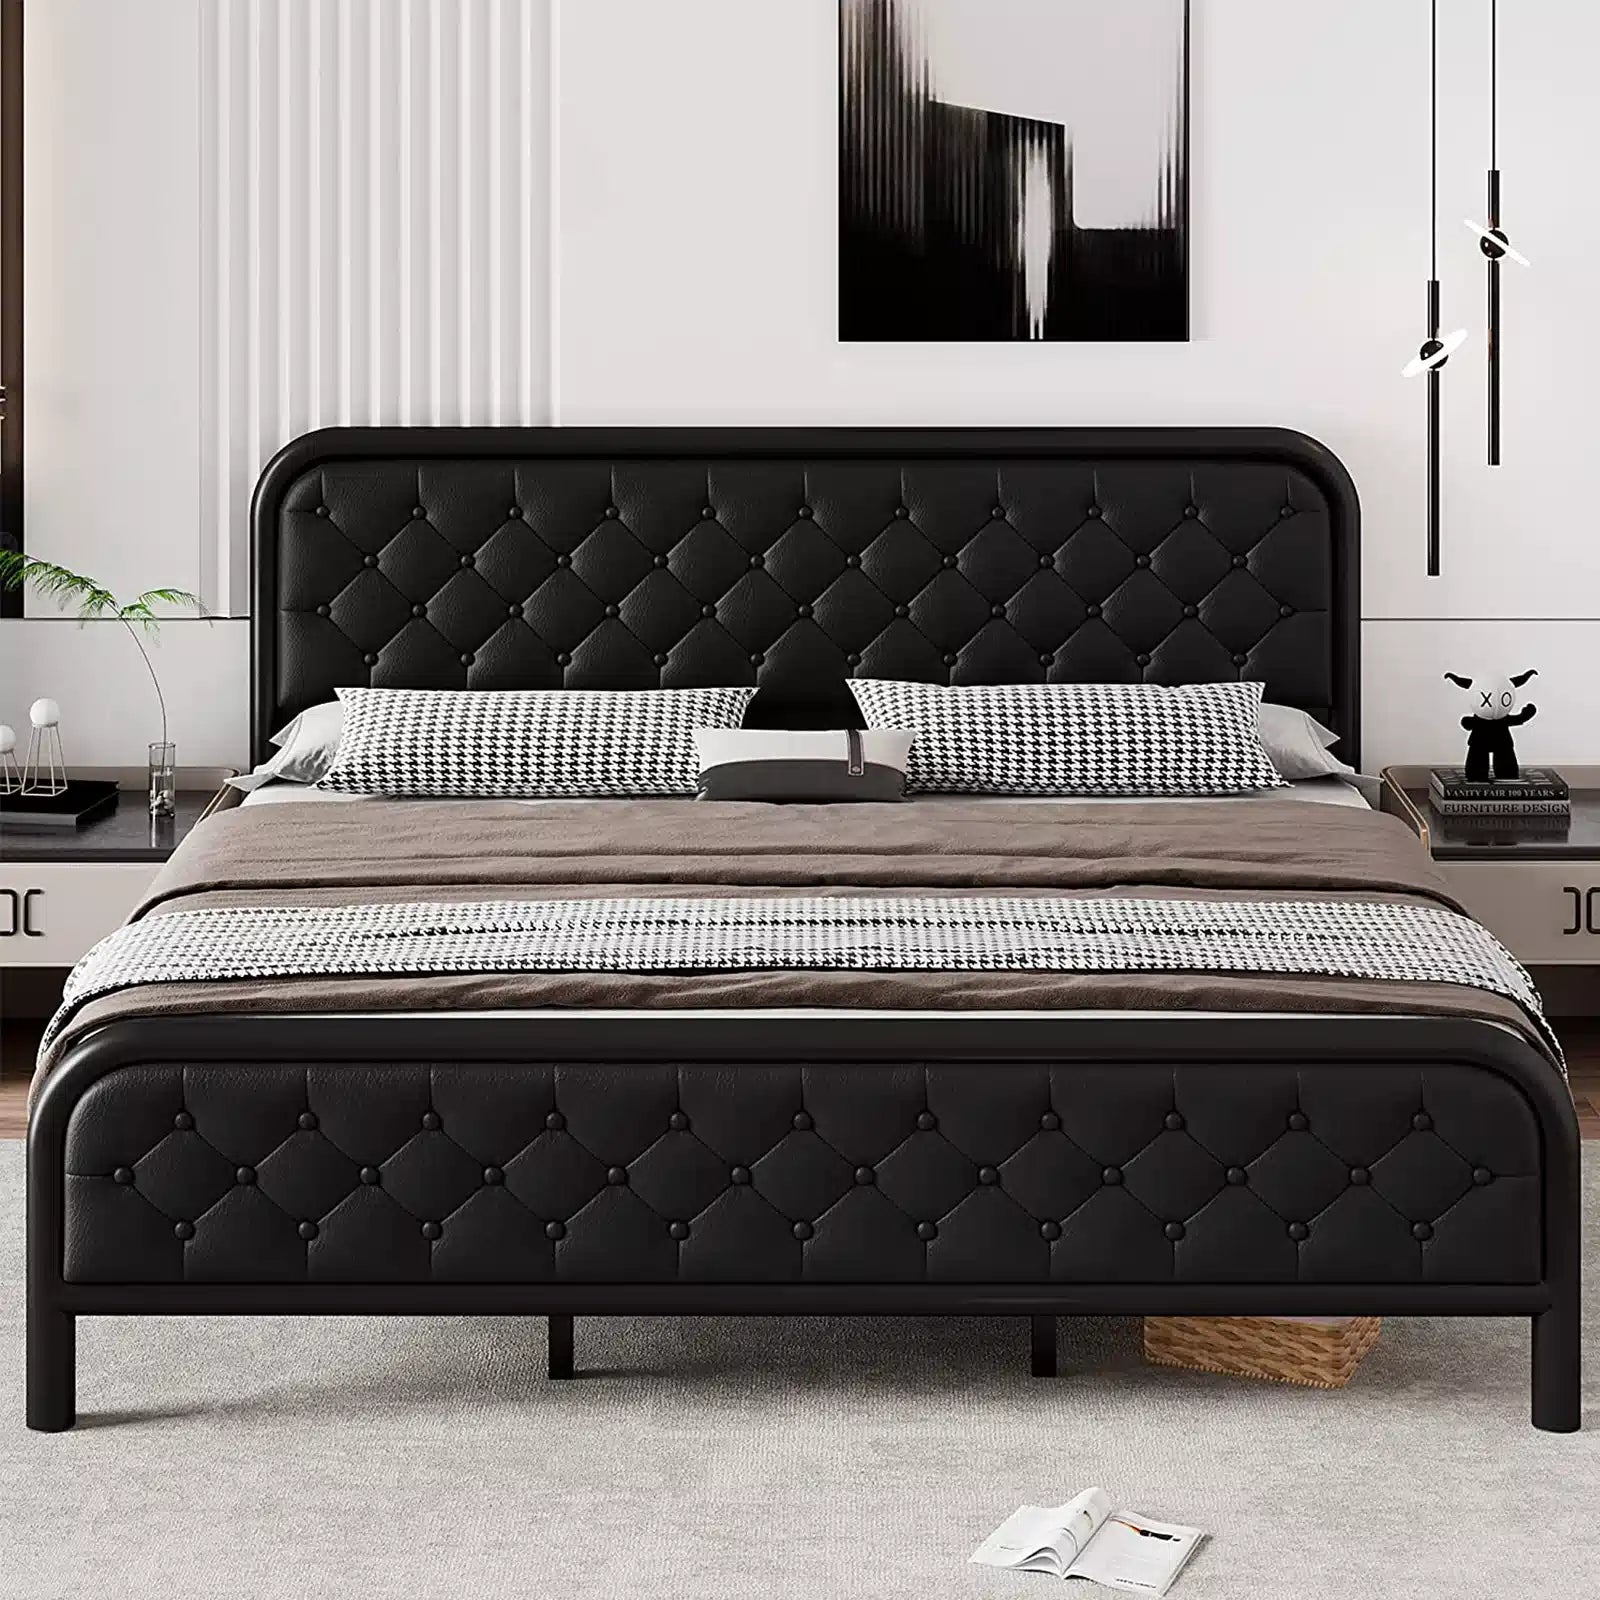 Metal Bed Frame, Heavy-Duty Platform Bed Frame with Faux Leather Button Tufted Headboard, 12" Storage Space, Thick Steel Slats